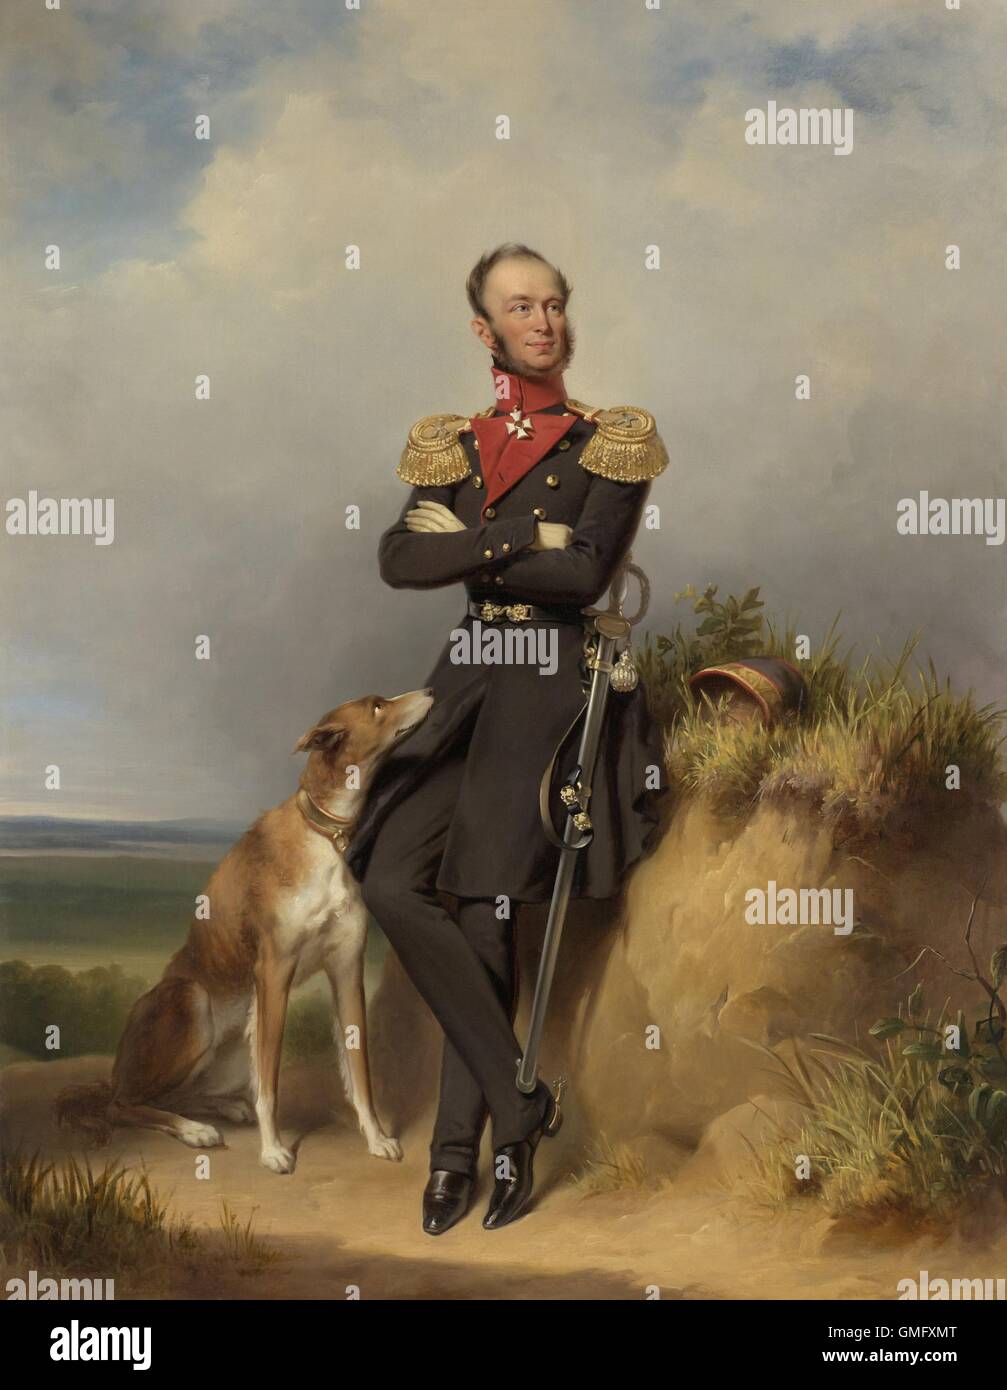 William II, King of the Netherlands, by Jan Adam Kruseman, 1839, Dutch painting, oil on canvas. Wearing a military uniform, he is with his dog on sand dunes (BSLOC 2016 2 261) Stock Photo